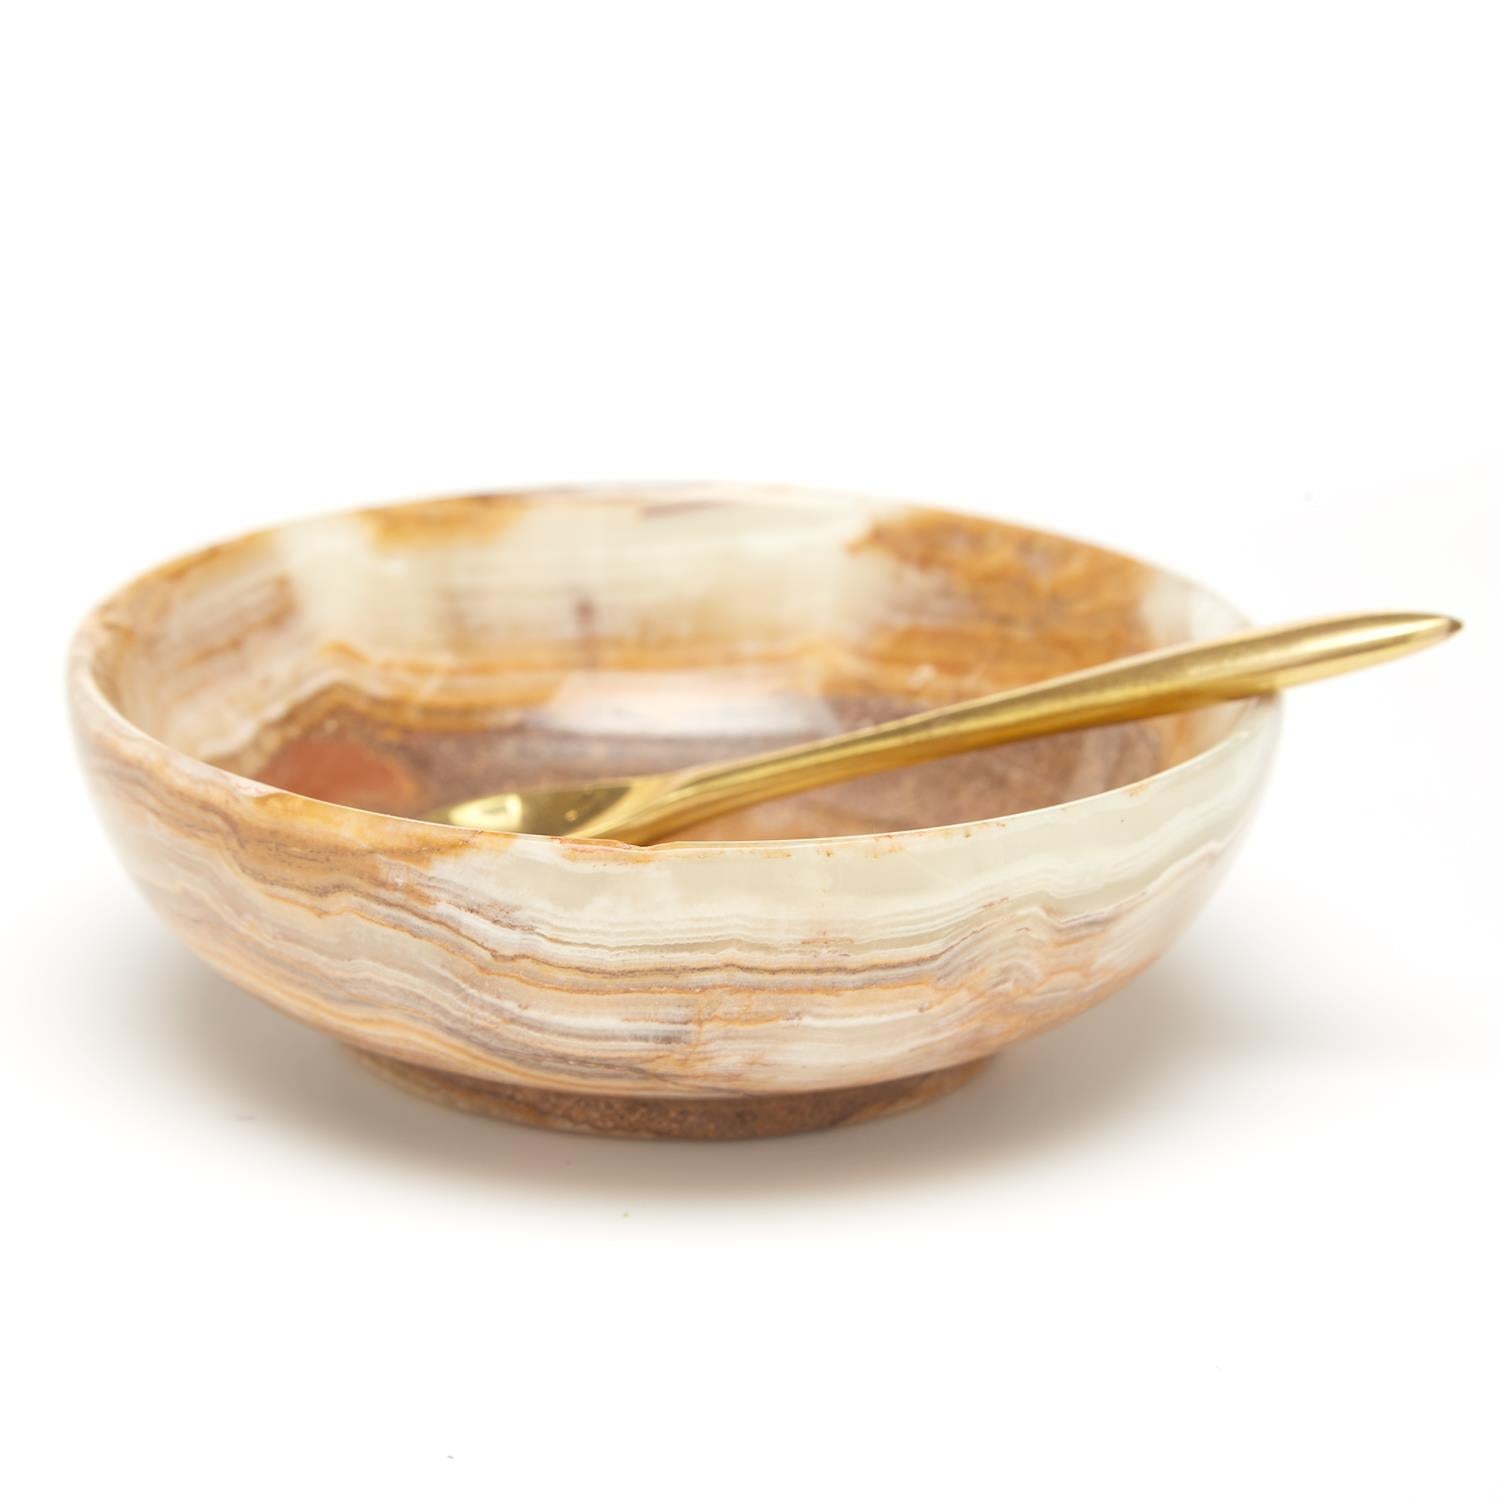 Onyx-Marble Bowl with Golden Spoon